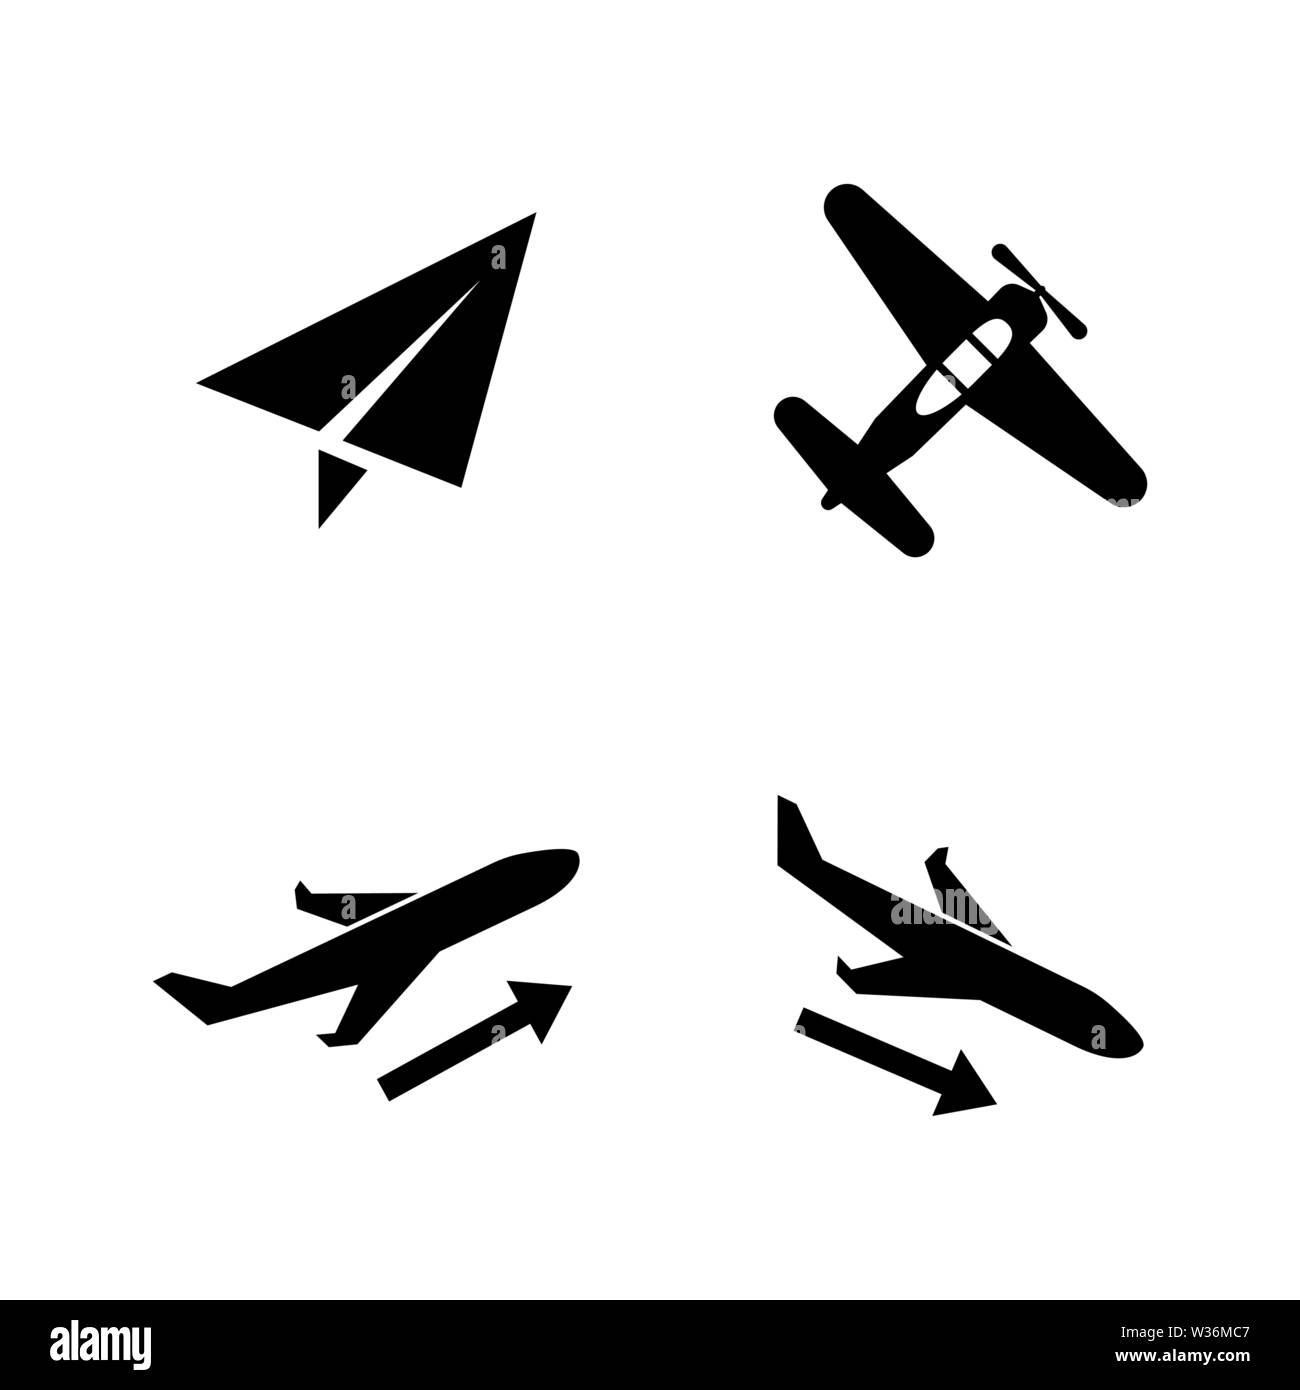 Plane, Aircraft, Airplane. Simple Related Vector Icons Set for Video, Mobile Apps, Web Sites, Print Projects and Your Design. Plane, Aircraft, Airplan Stock Vector